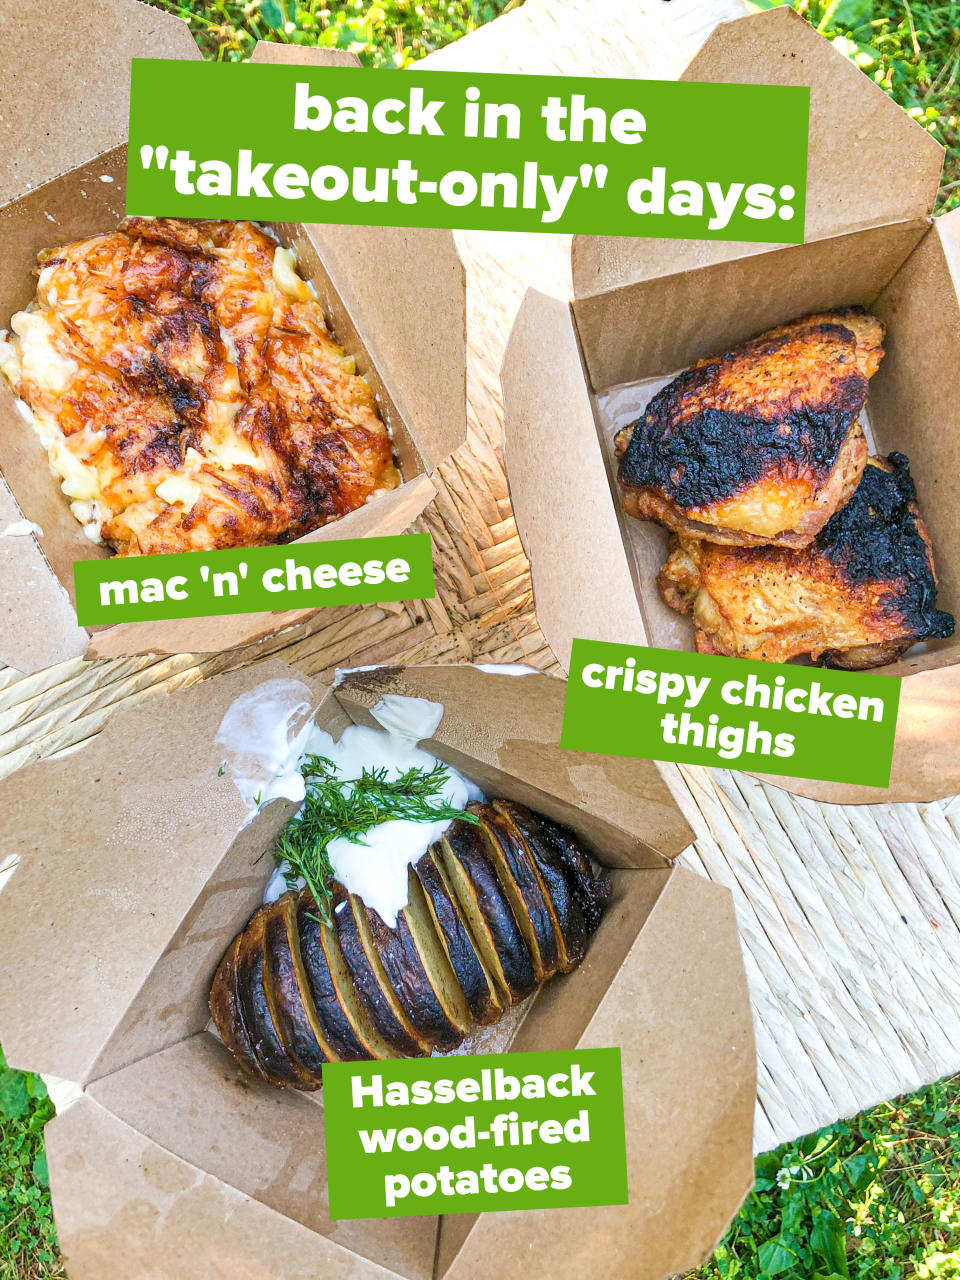 "Back in the takeout-only days text" with several items ID'ed: Hasselback wood-fired potatoes, mac 'n' cheese, and crispy chicken thighs